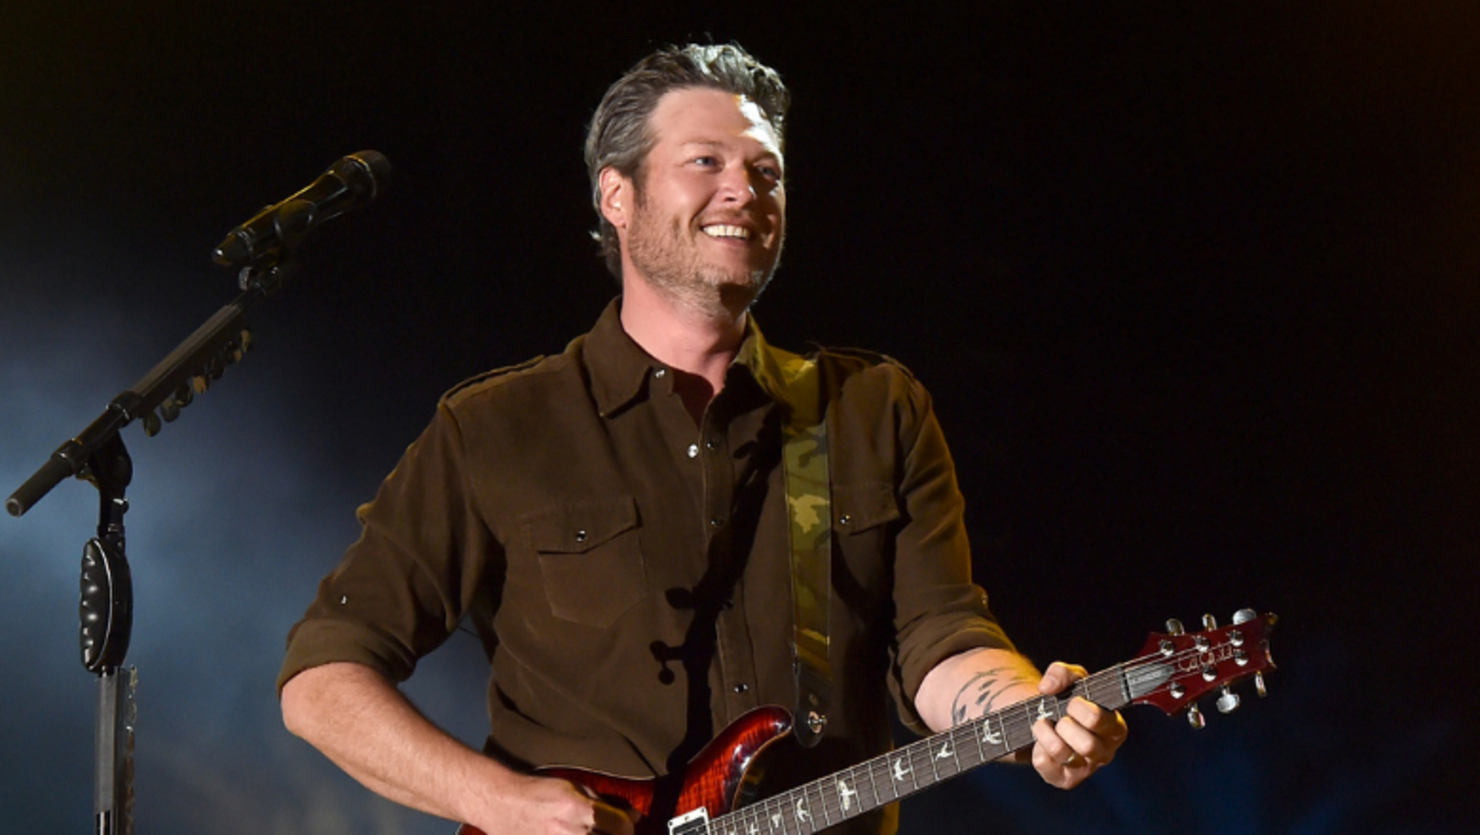 Blake Shelton Reflects On Joining The Grand Ole Opry 10 Years Ago